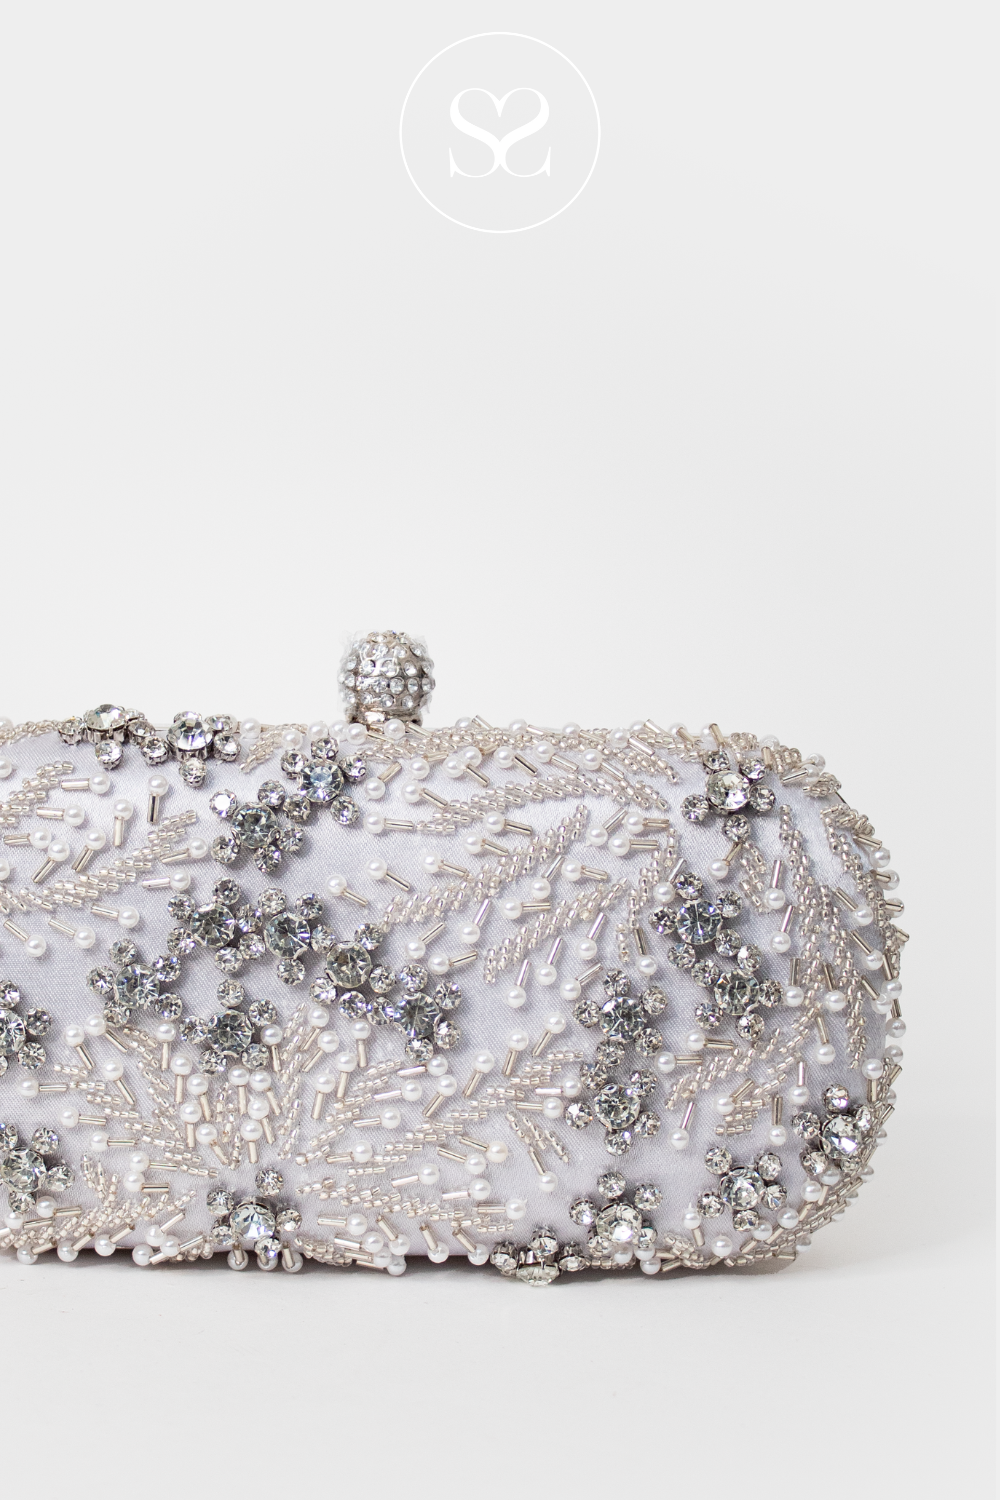 SHENEIL 006 IVORY GREY PEARL AND SILVER DIAMANTE CLUTCH BAG